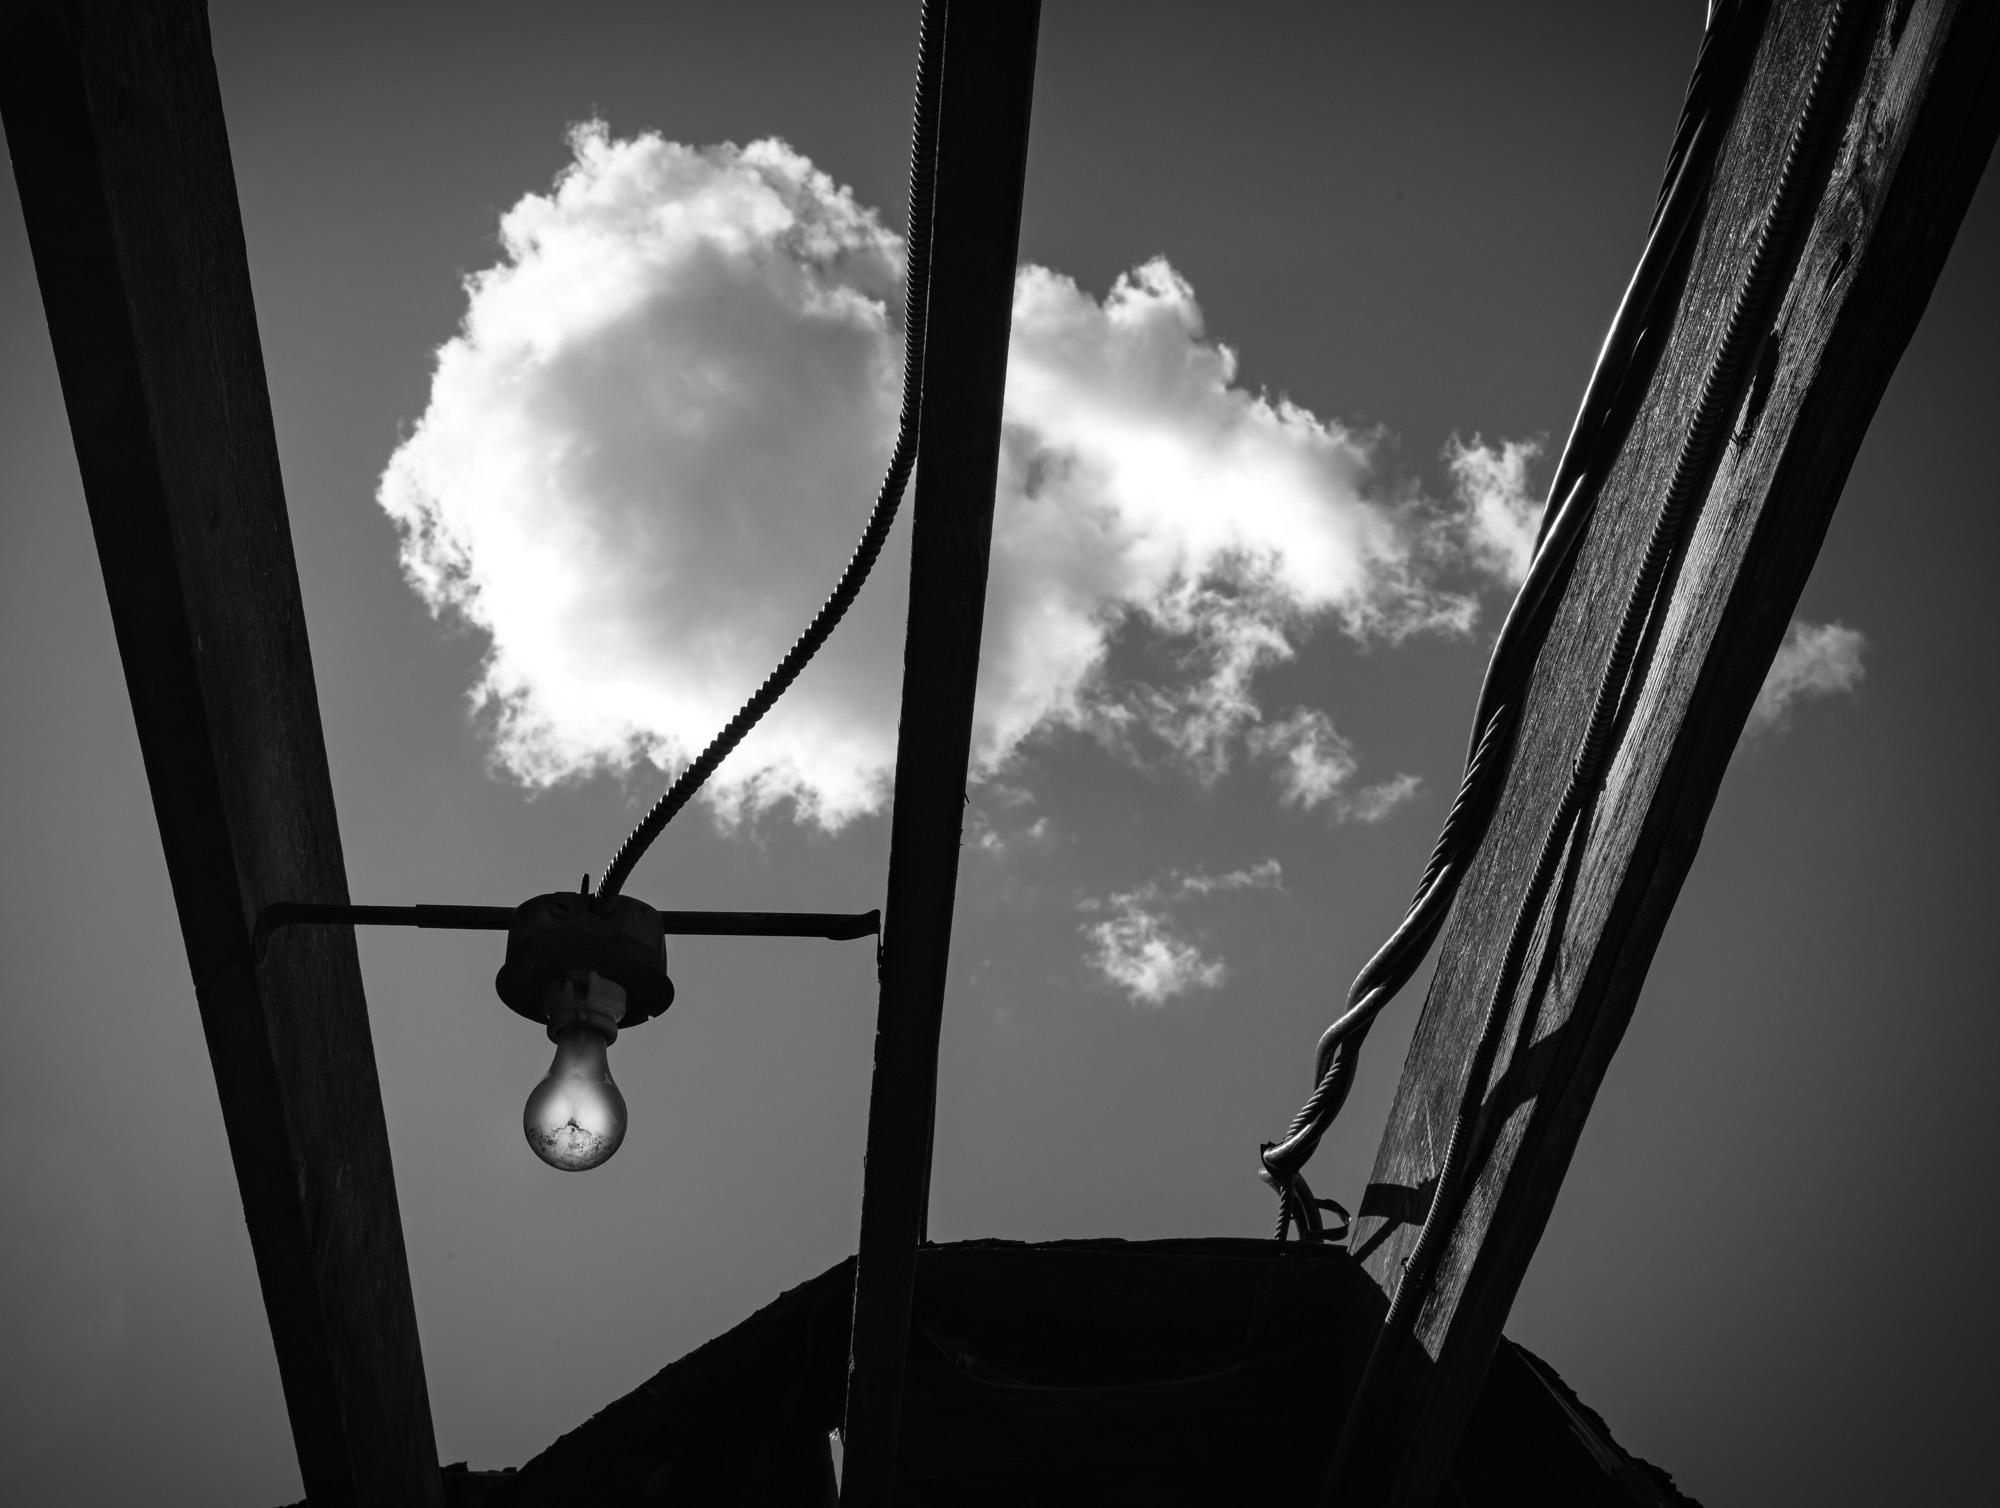 Limited Edition Black and White Photograph, Bulb and Cloud 2021 20 x 24. I enjoy exploring abandoned buildings and this one was ripe for a Sunday afternoon with a perfect cloud to get the right composition.

About:
Lewis’ artistic practice often